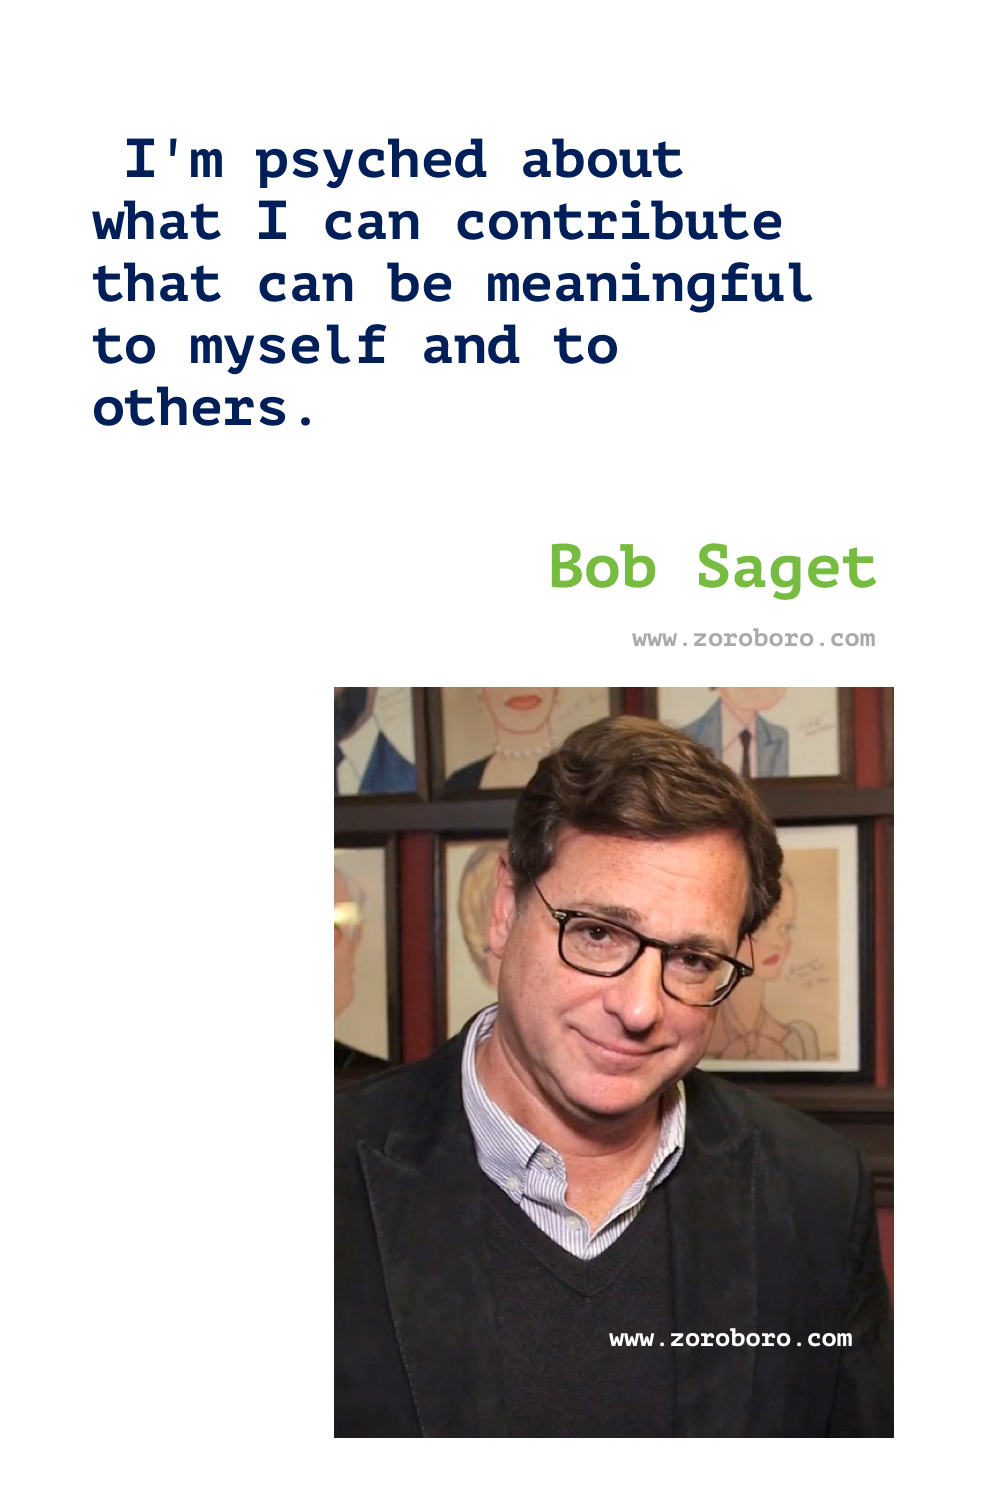 Bob Saget Quotes. Bob Saget Comedy Quotes, Dad Quotes, House Quotes, & Mom Quotes. Bob Saget Funny Quotes. Bob Saget Stand-up Comedian. Bob Saget Quotes, Comedian and 'Full House' star.